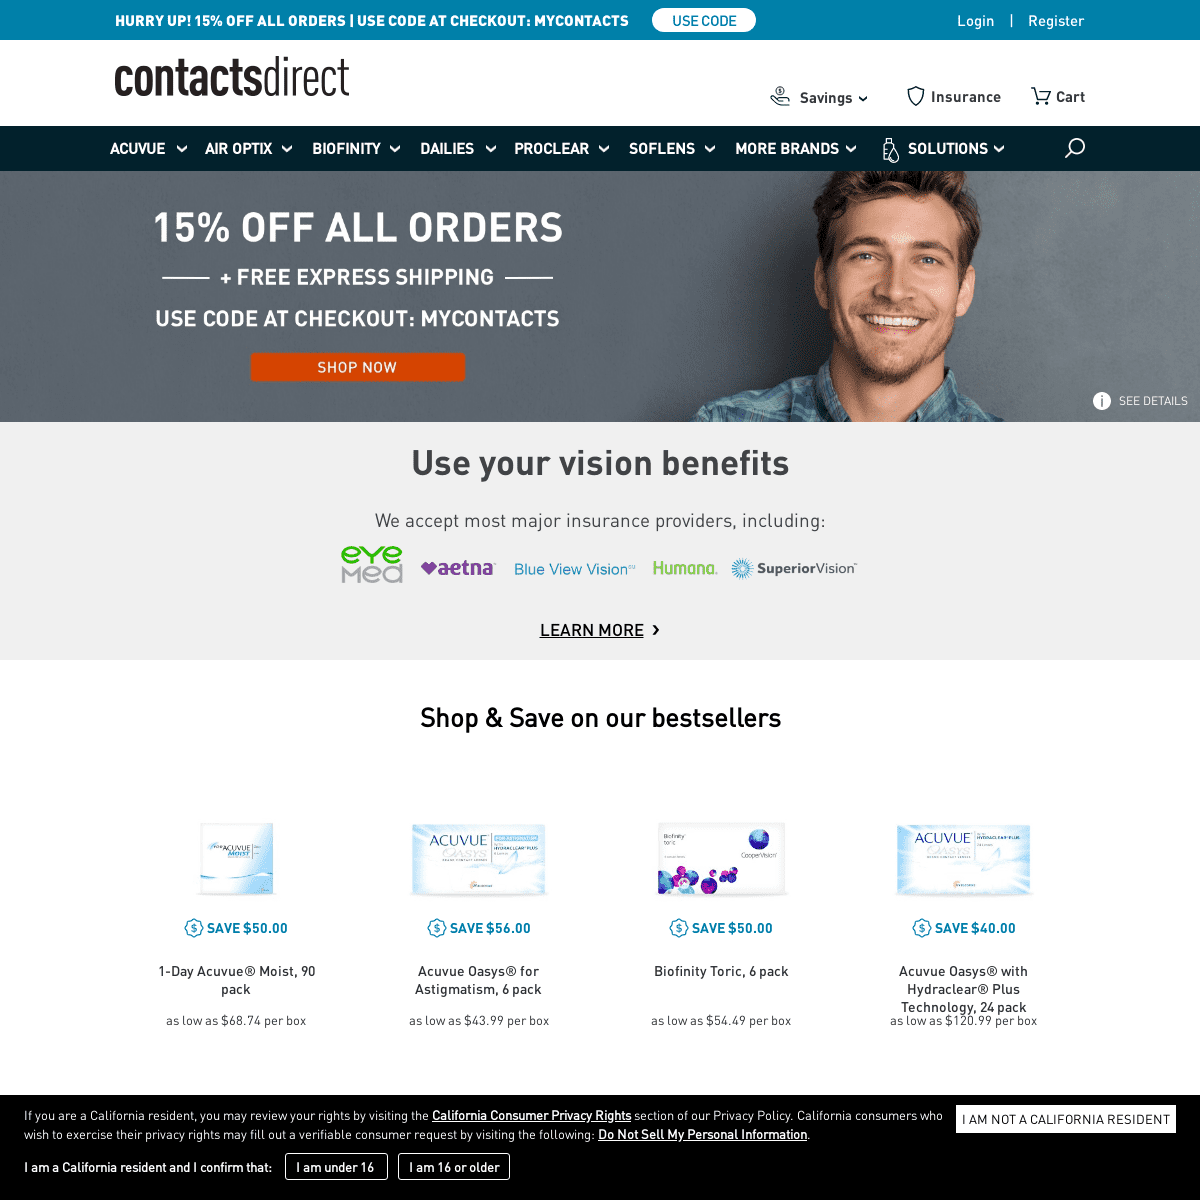 A complete backup of contactsdirect.com